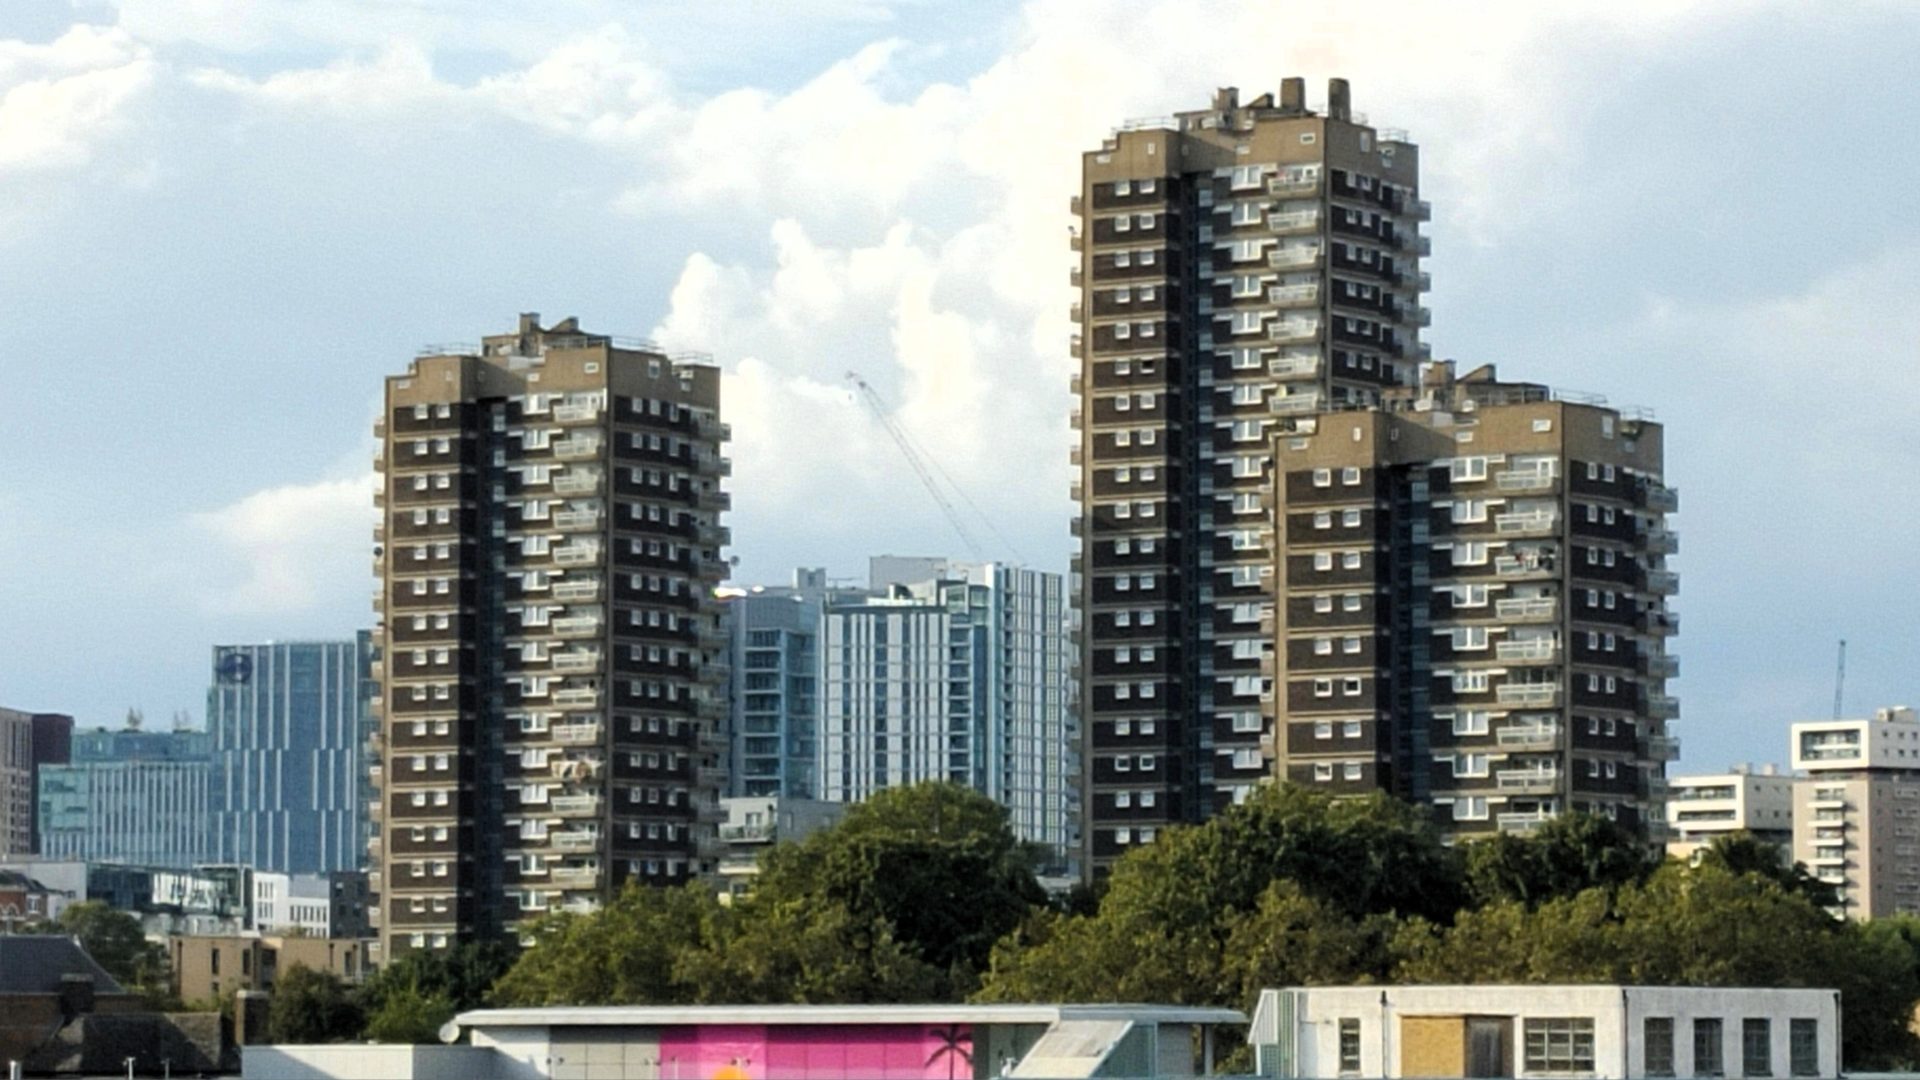 Building Safety Regulator - A view of residential high-rises.